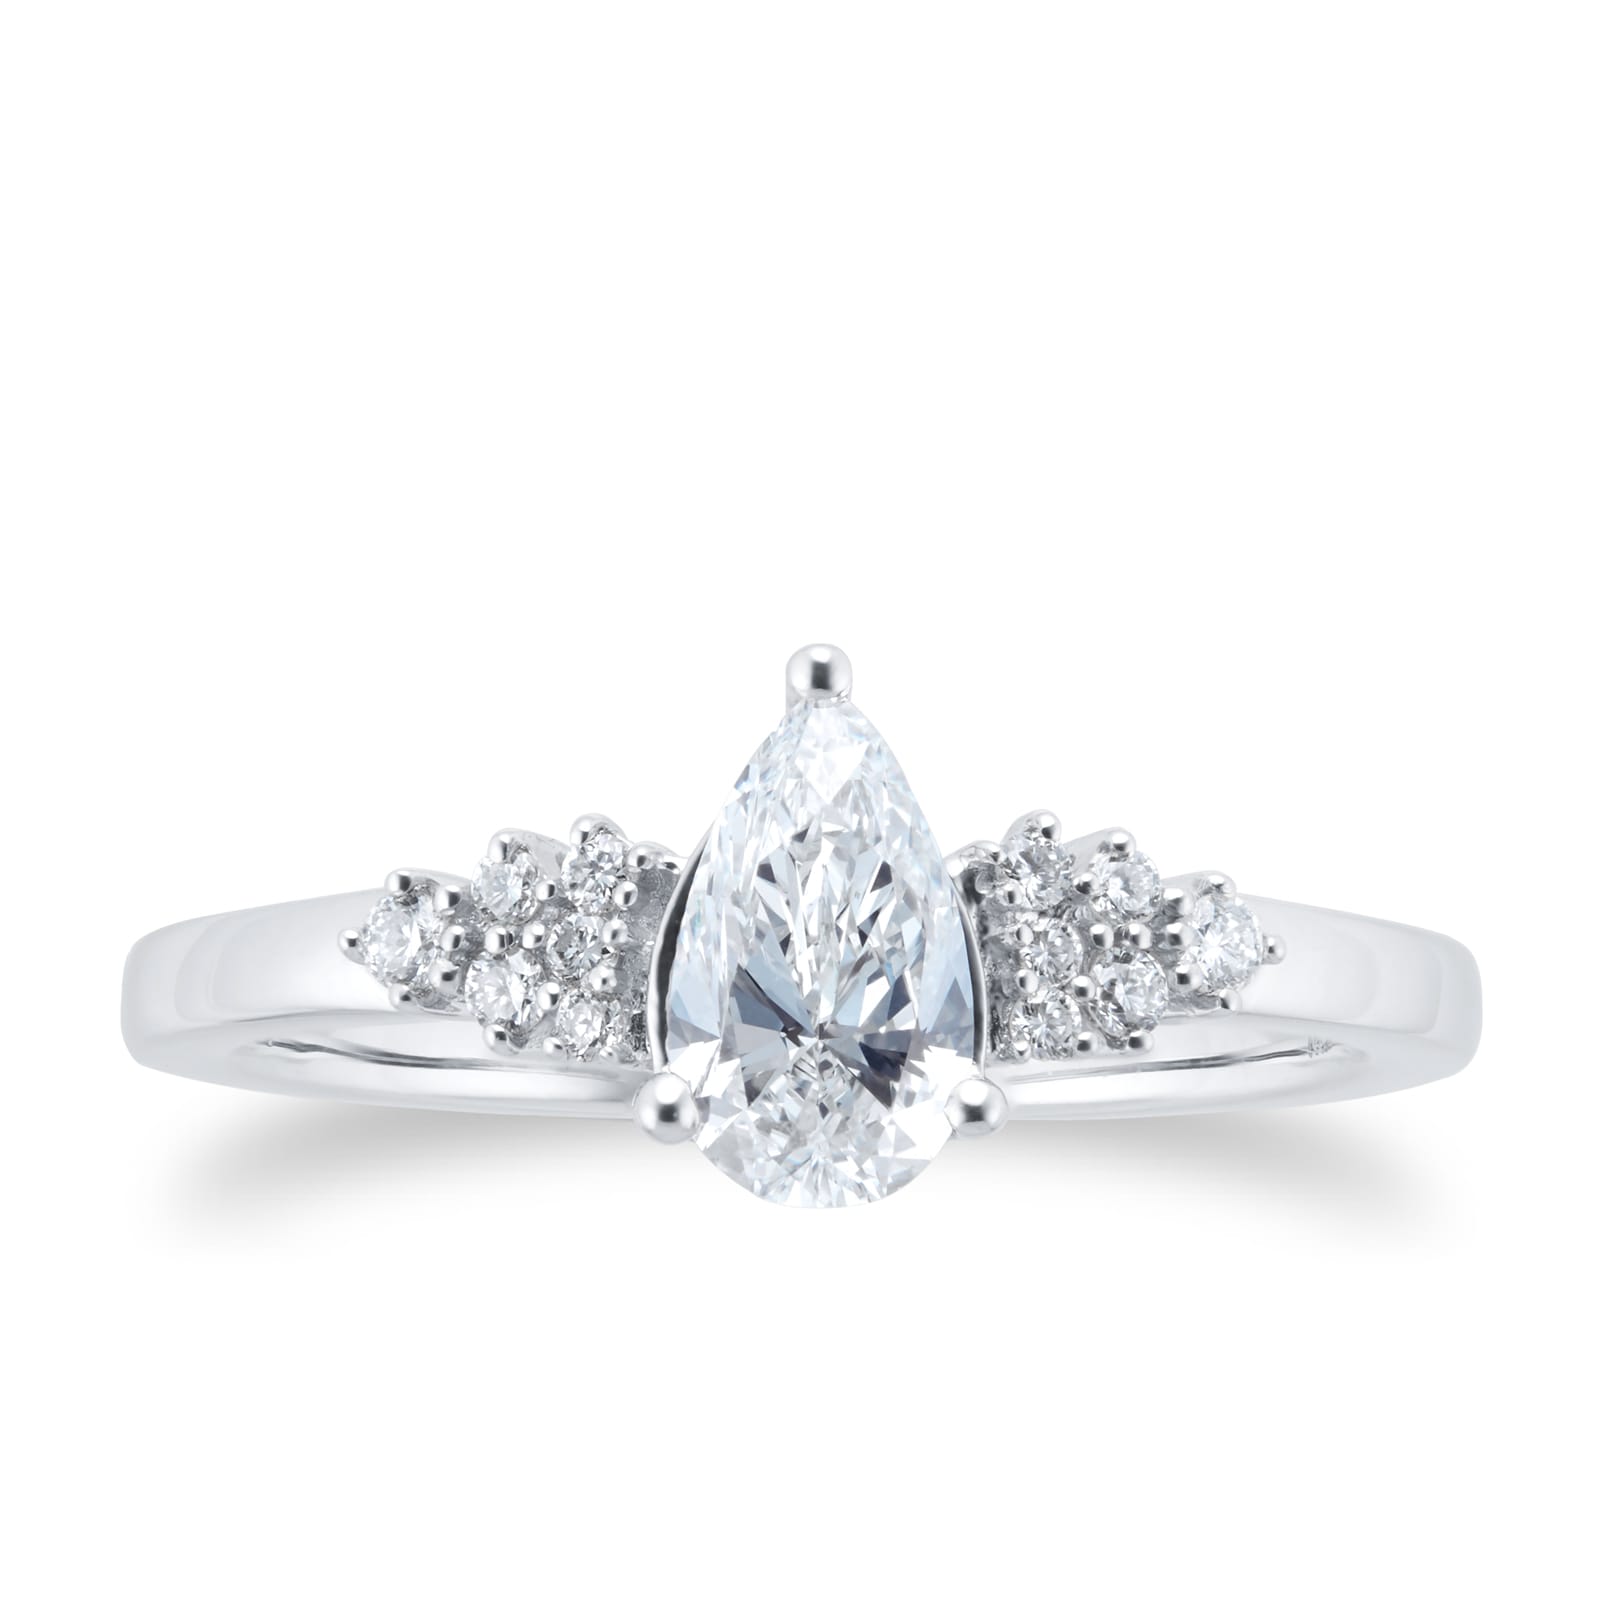 Platinum 0.70cttw Diamond Pear Scatter Engagement Ring - Ring Size J